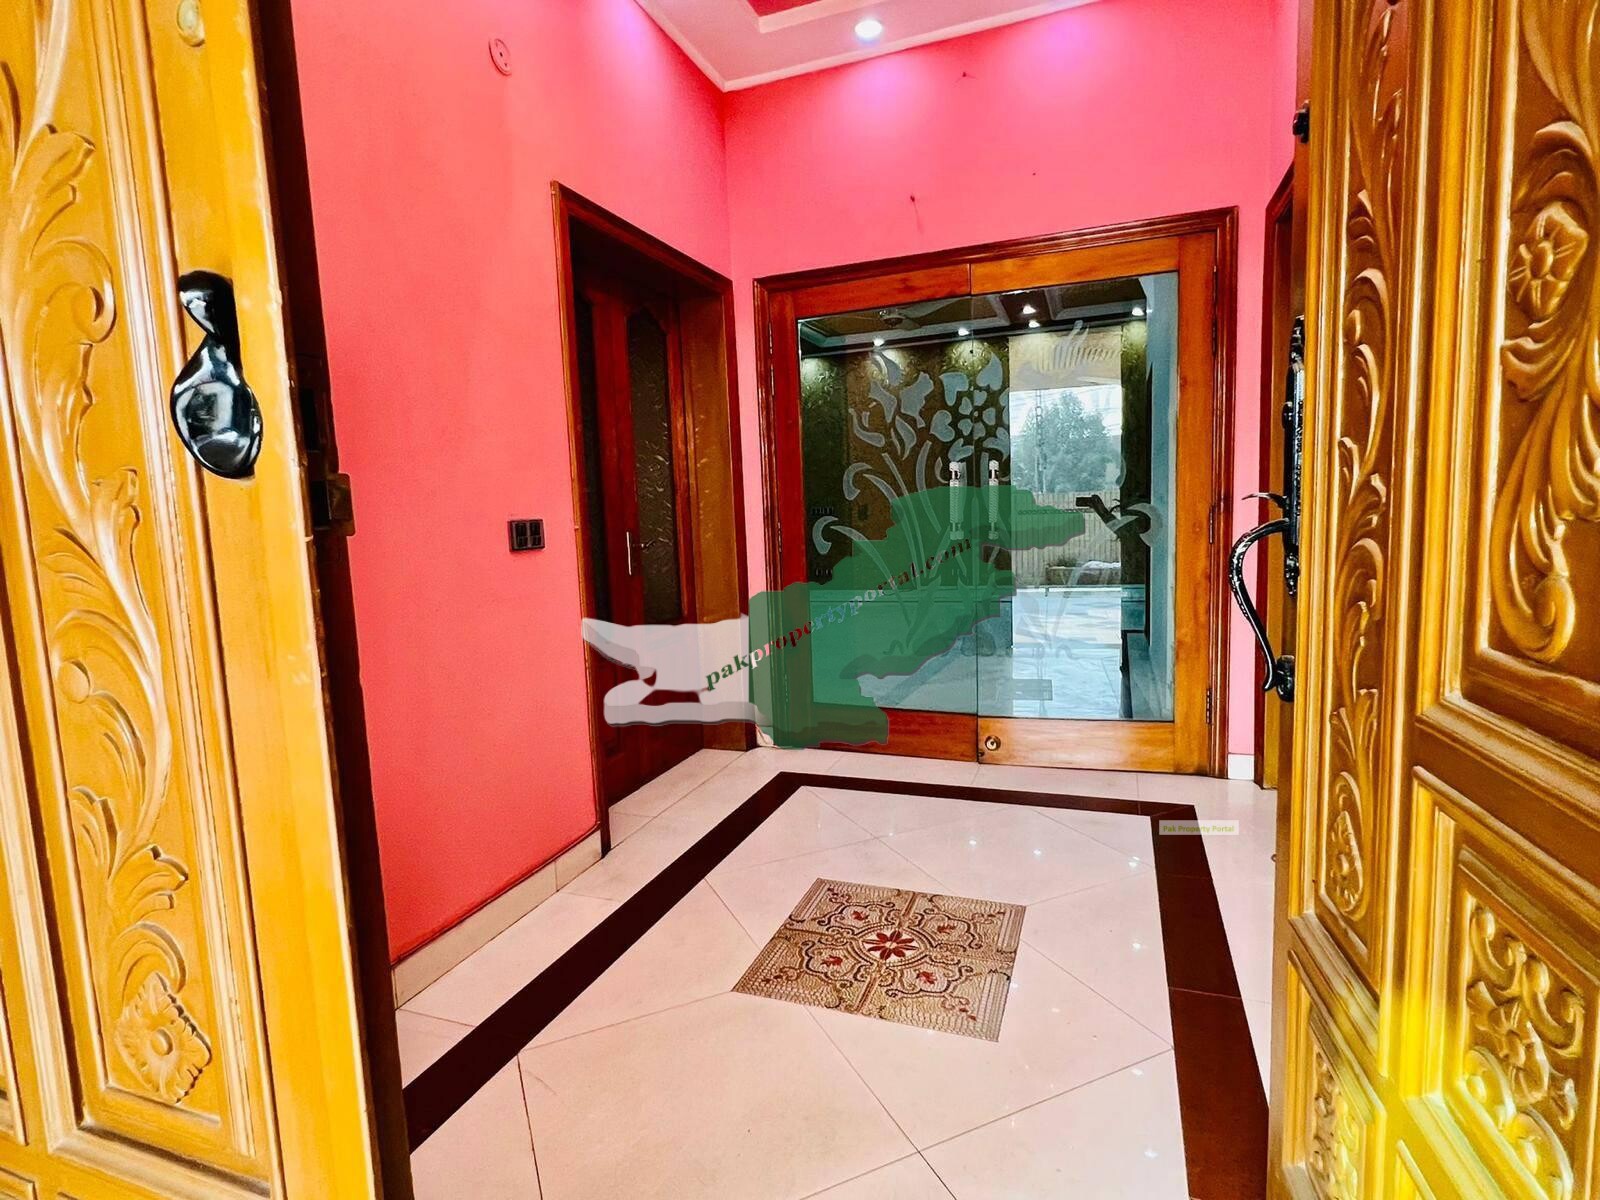 21-Marla Double Unint Bungalow For Sale in PAF Officer's Colony Oppostie Askari-09 Zarrar Shaheed Road Lahore